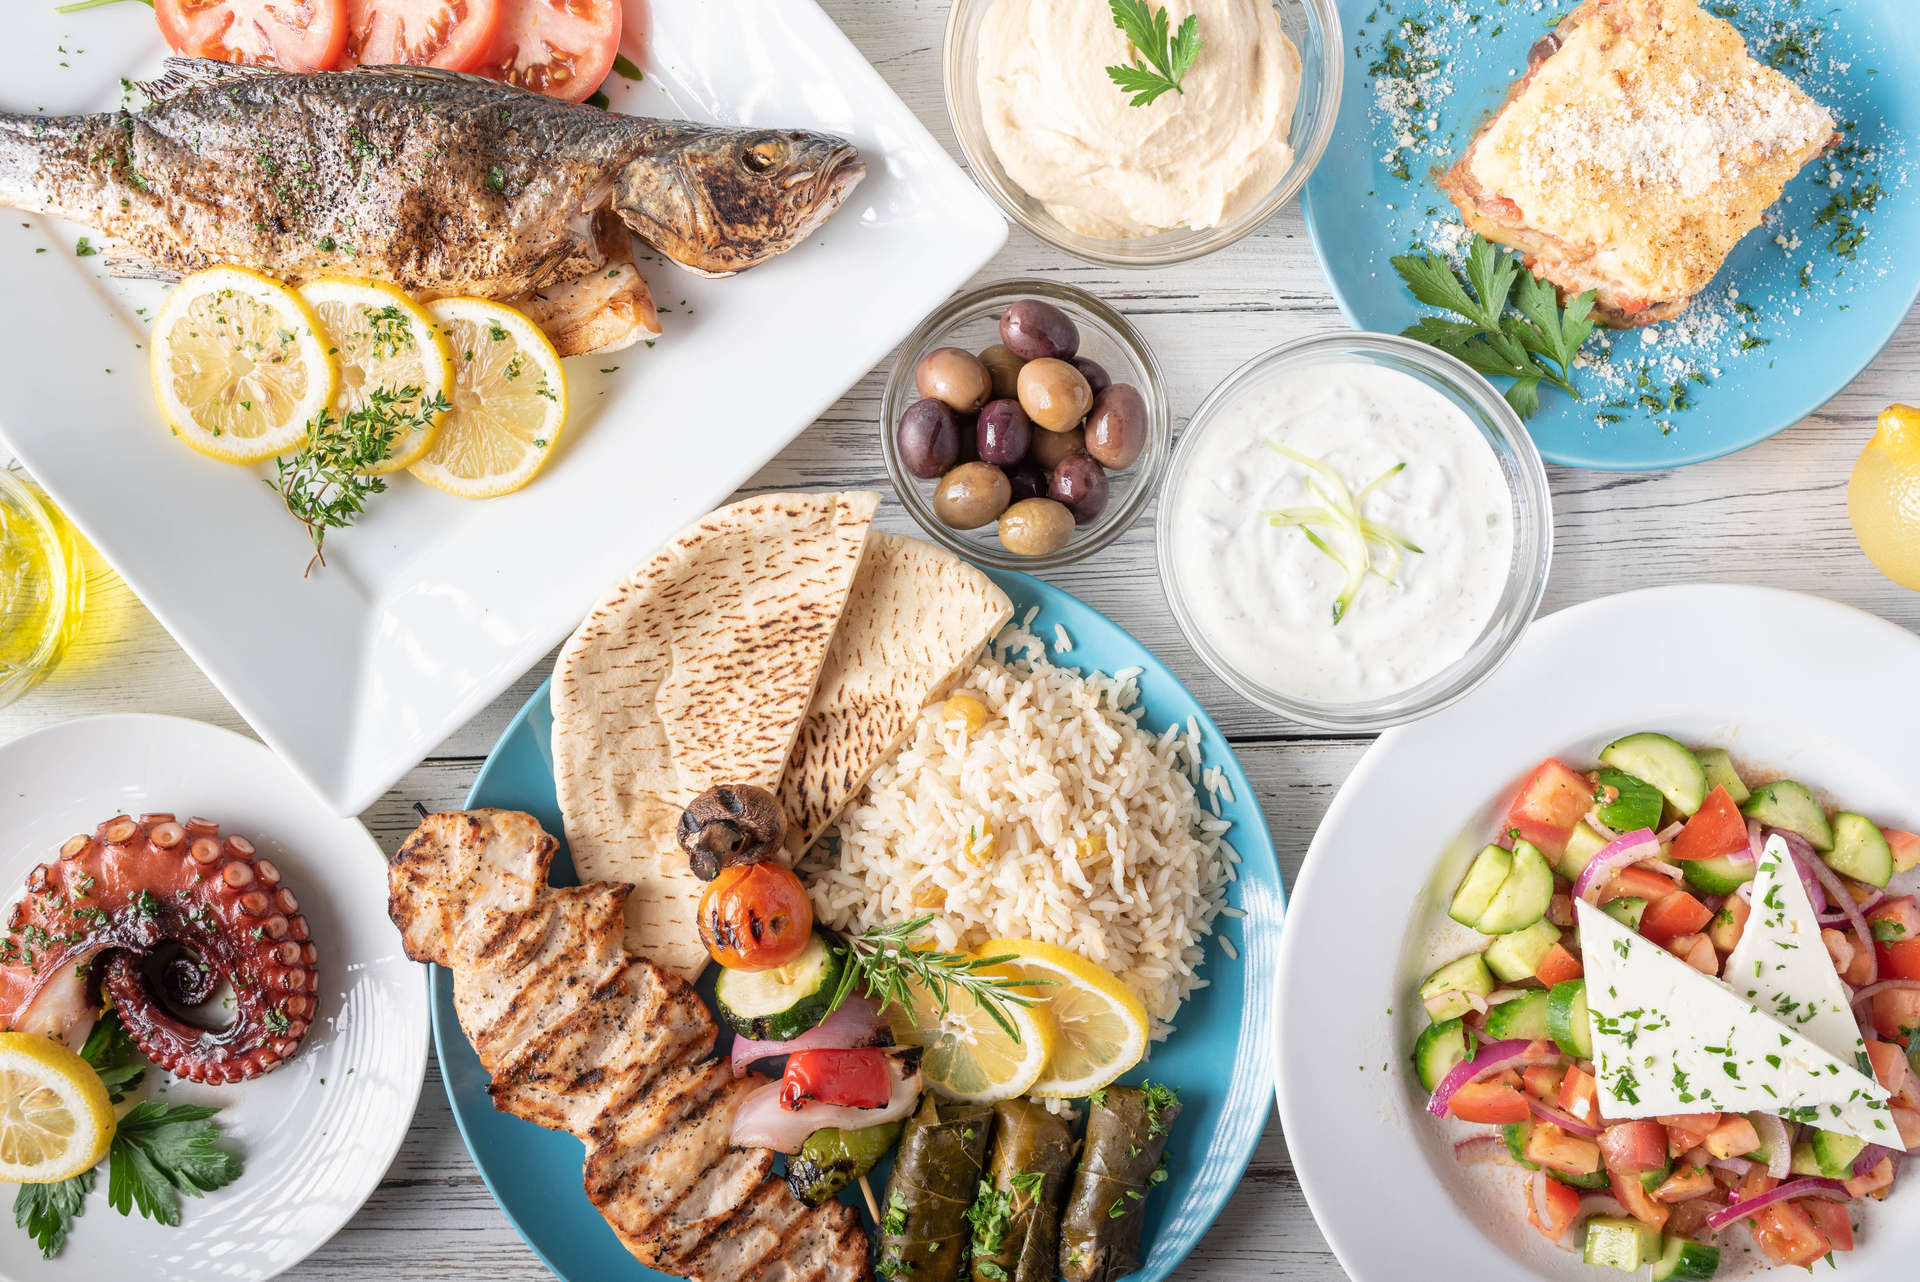 classic Greek dishes and local specialties